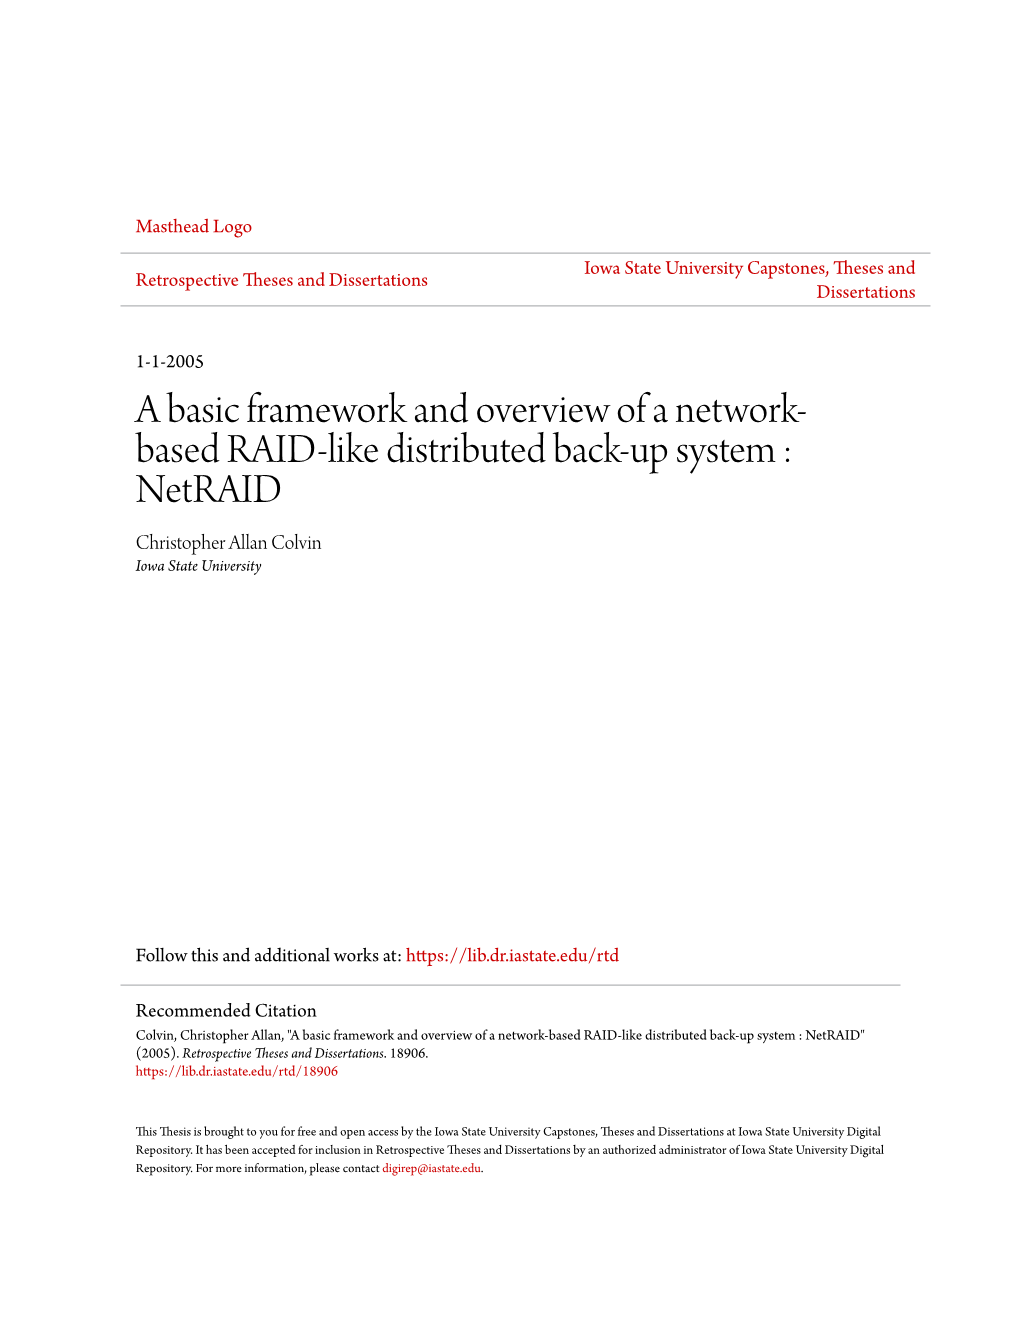 A Basic Framework and Overview of a Network-Based RAID-Like Distributed Back-Up System : Netraid" (2005)